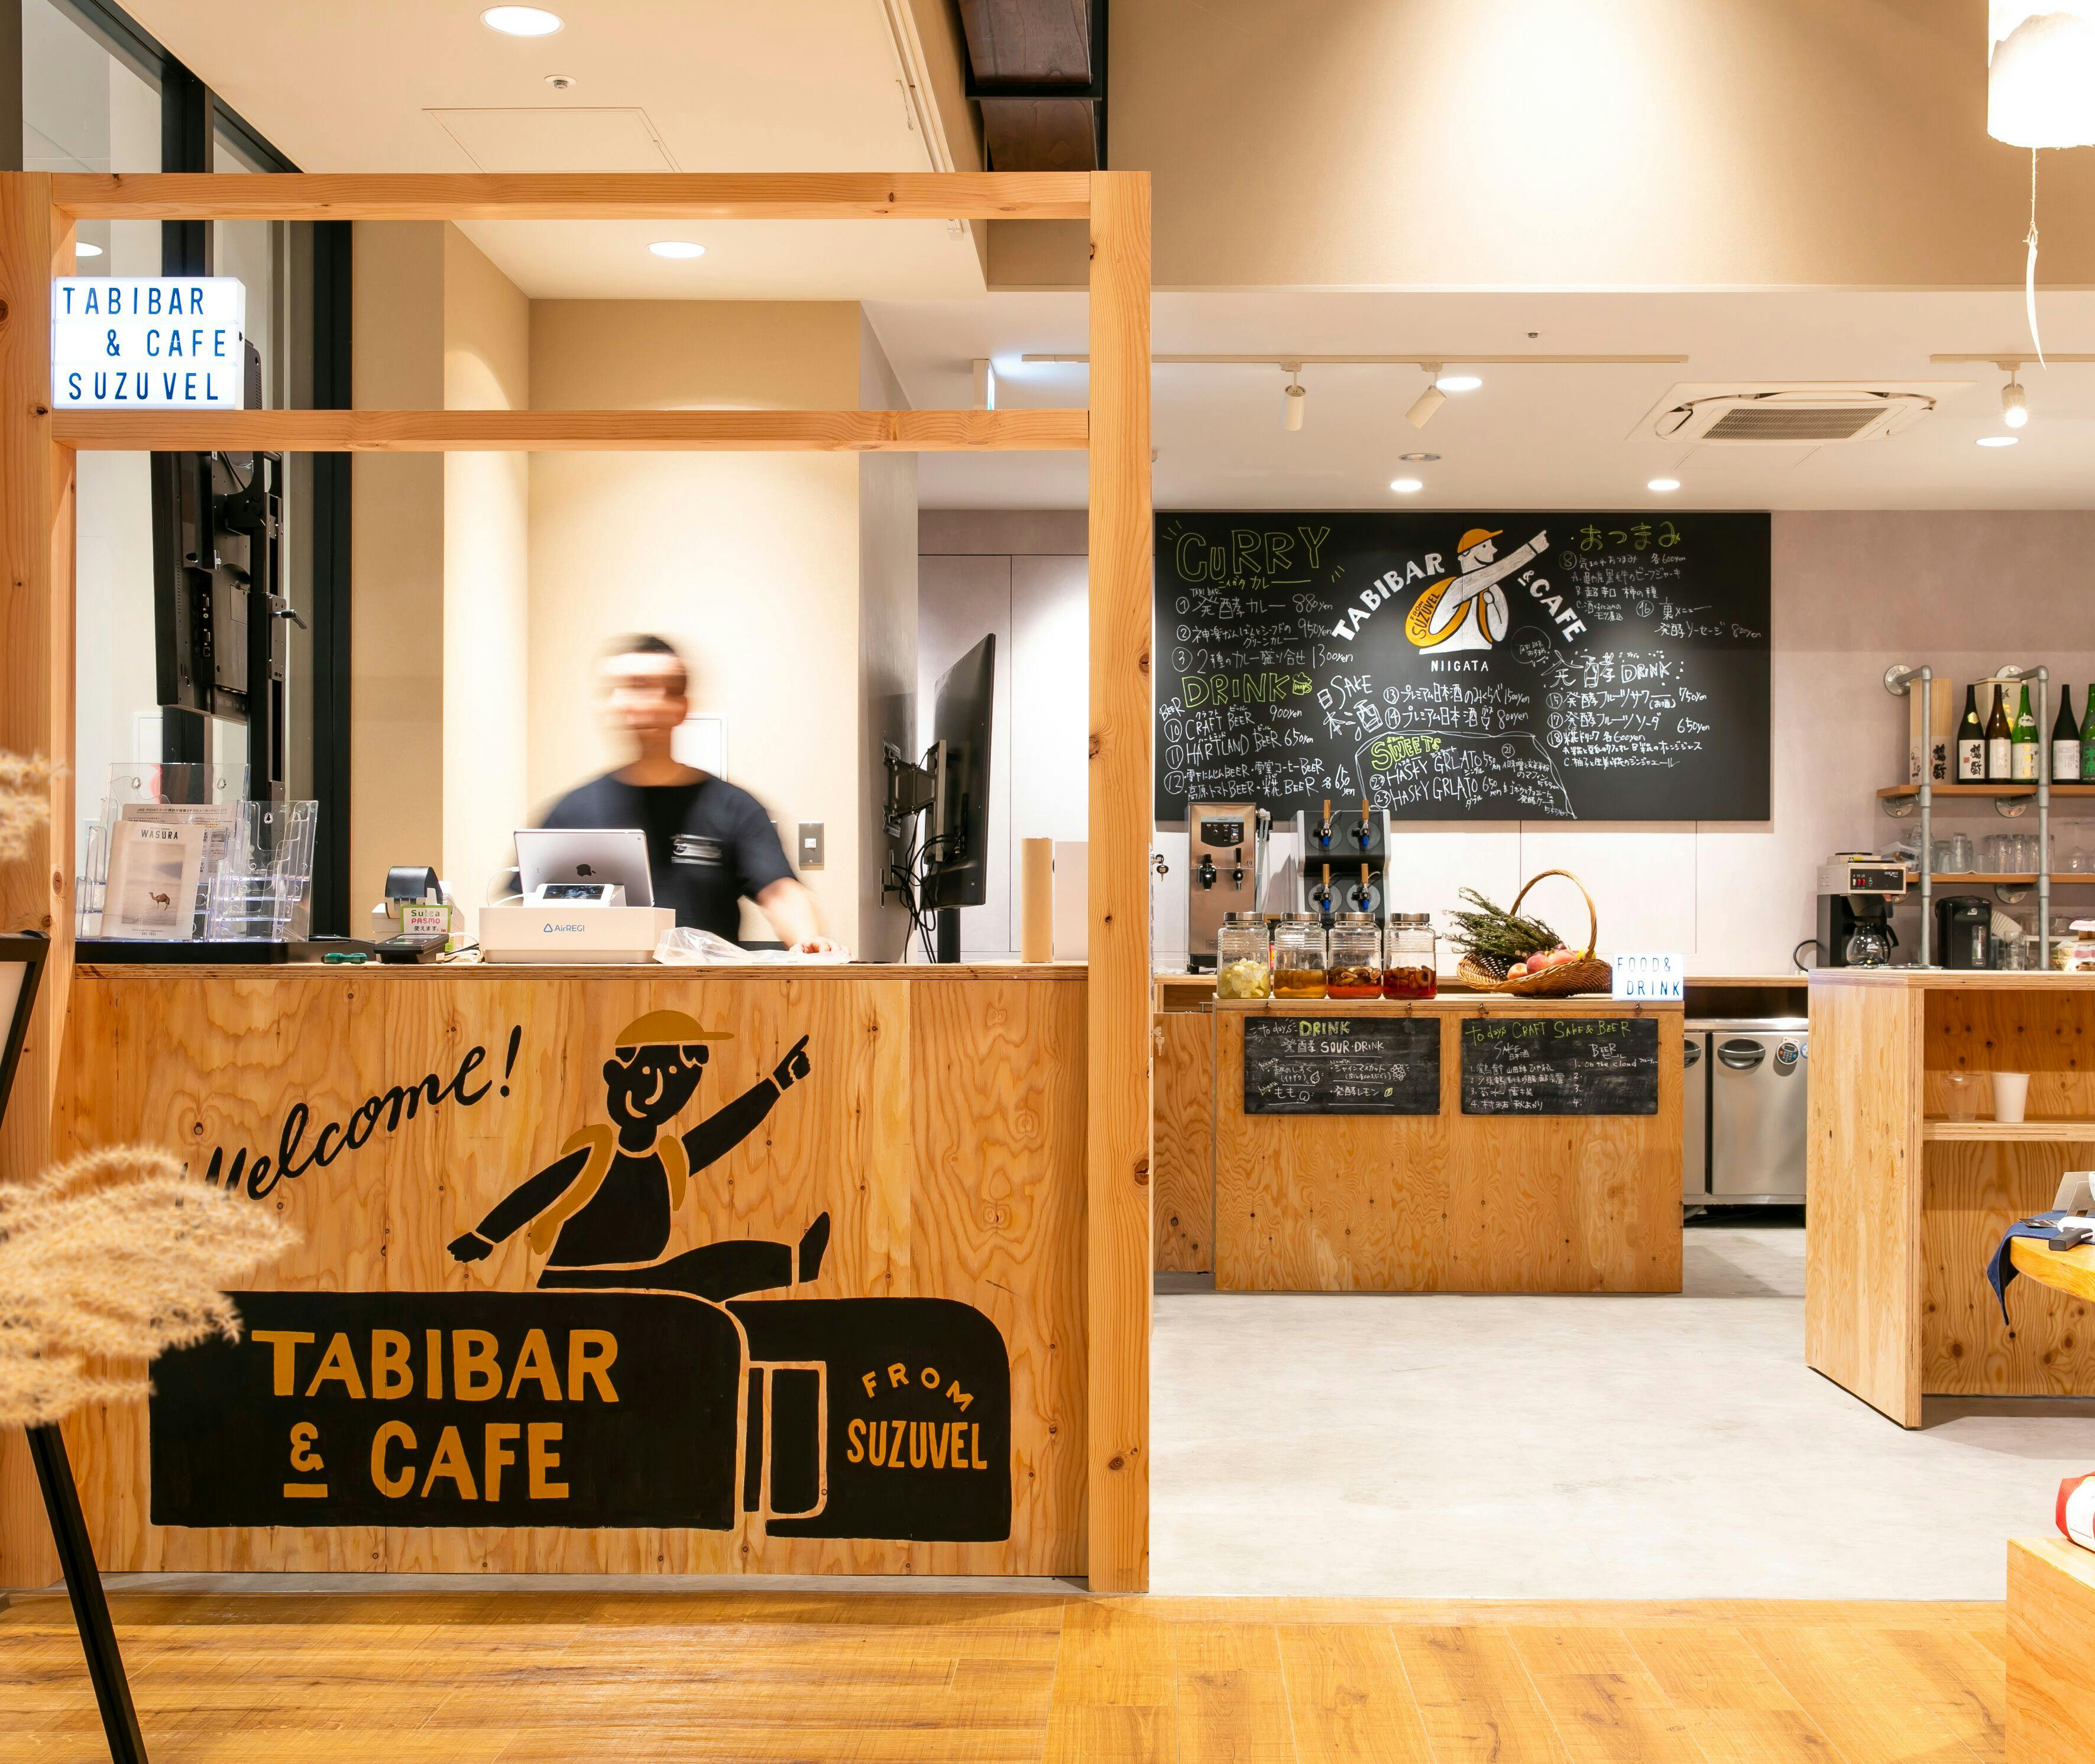 TABI BAR & CAFE from SUZUVEL